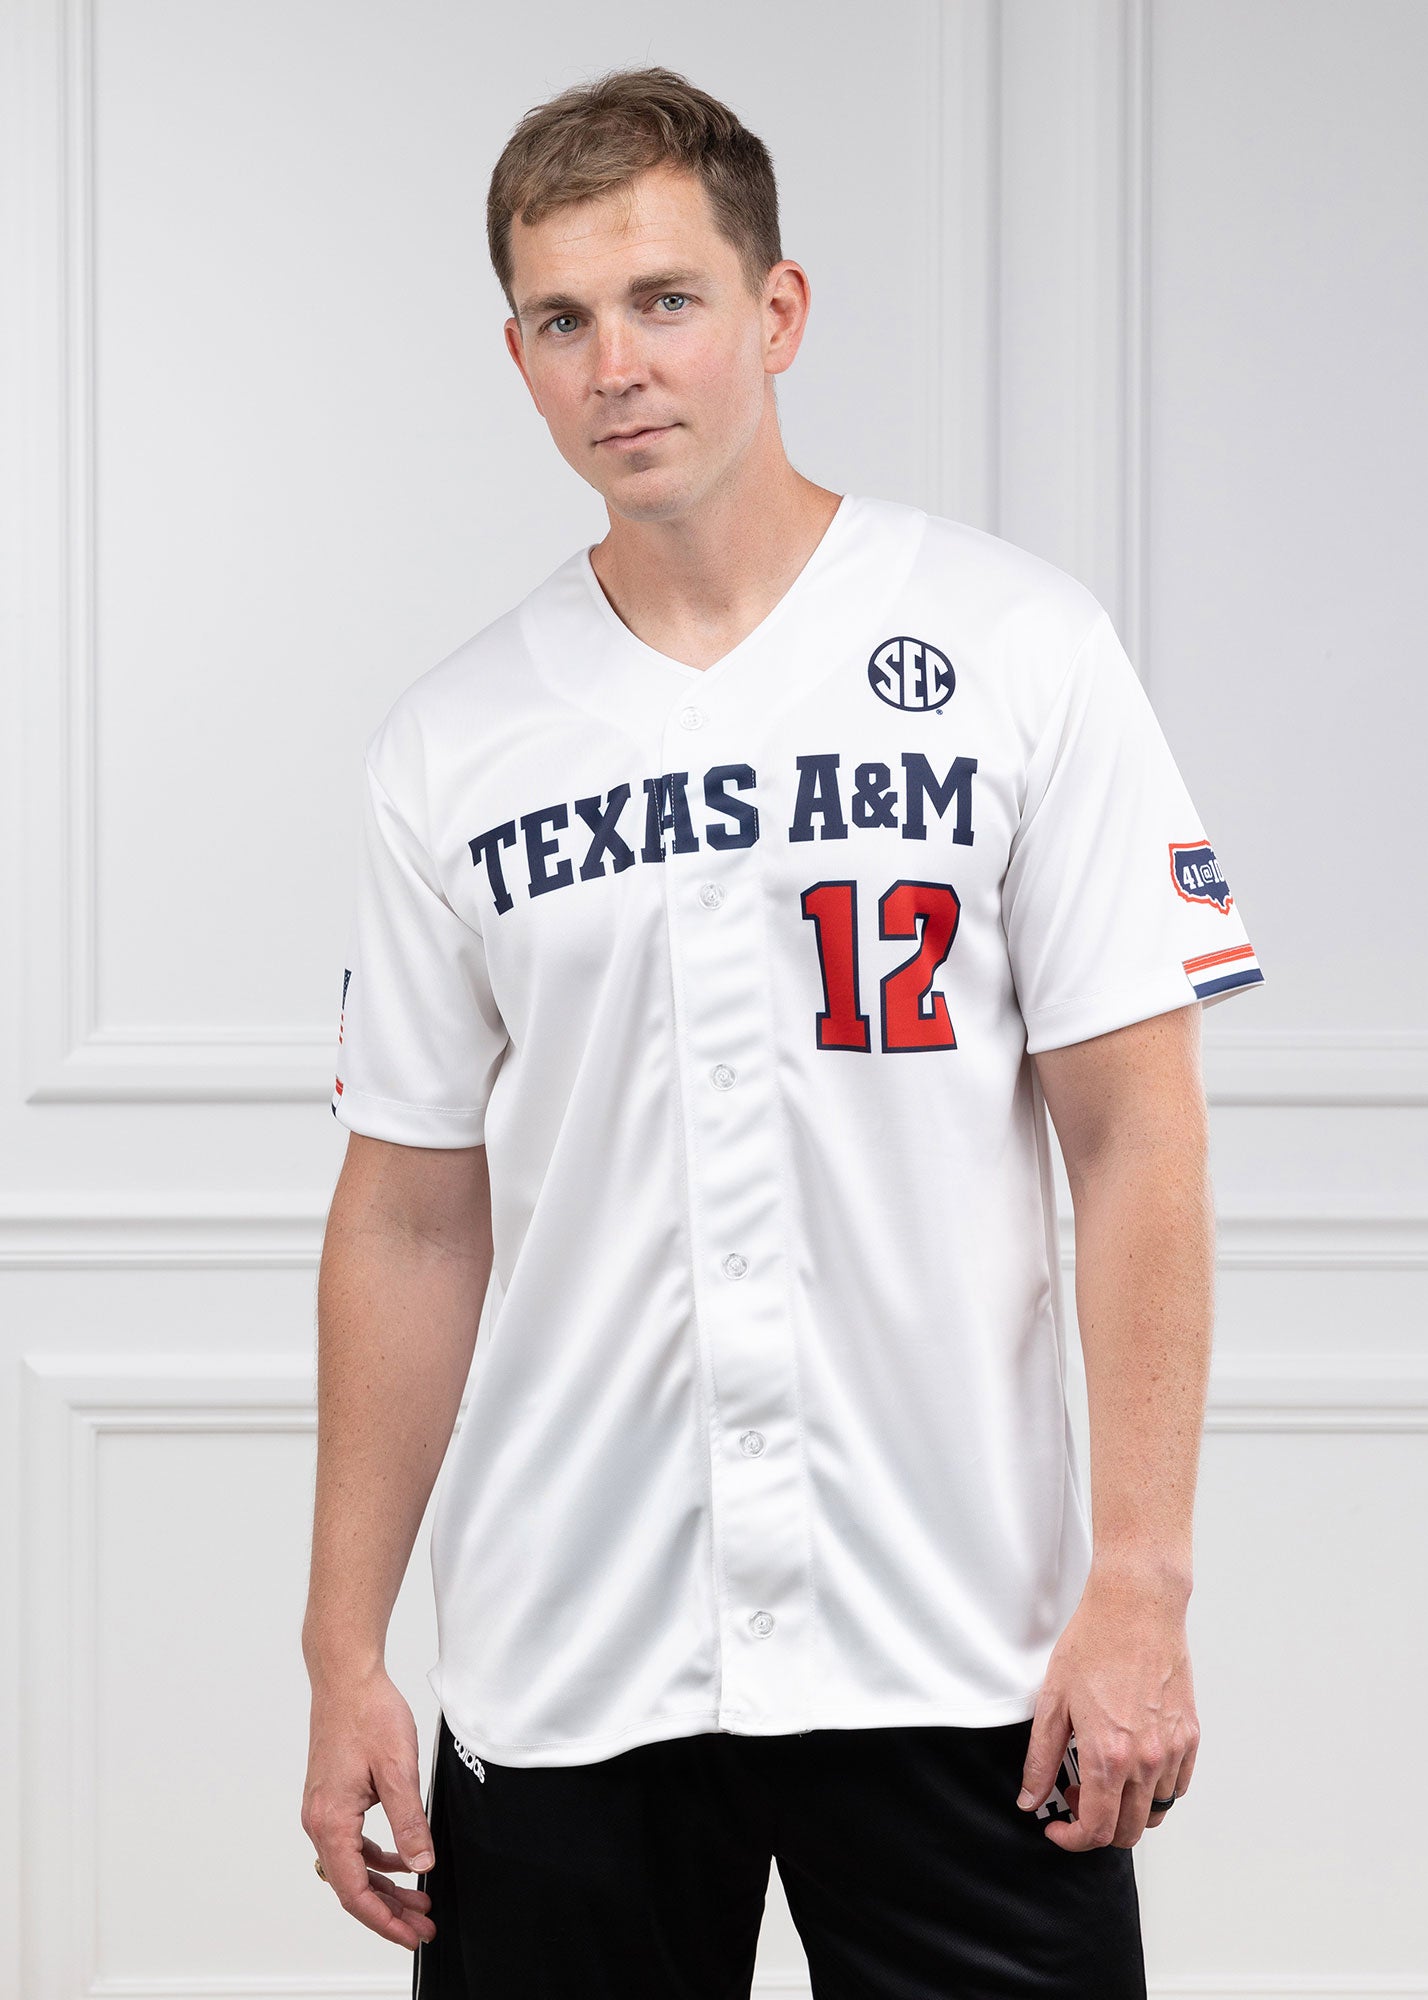 Texas A&M Red White and Blue Baseball Jersey